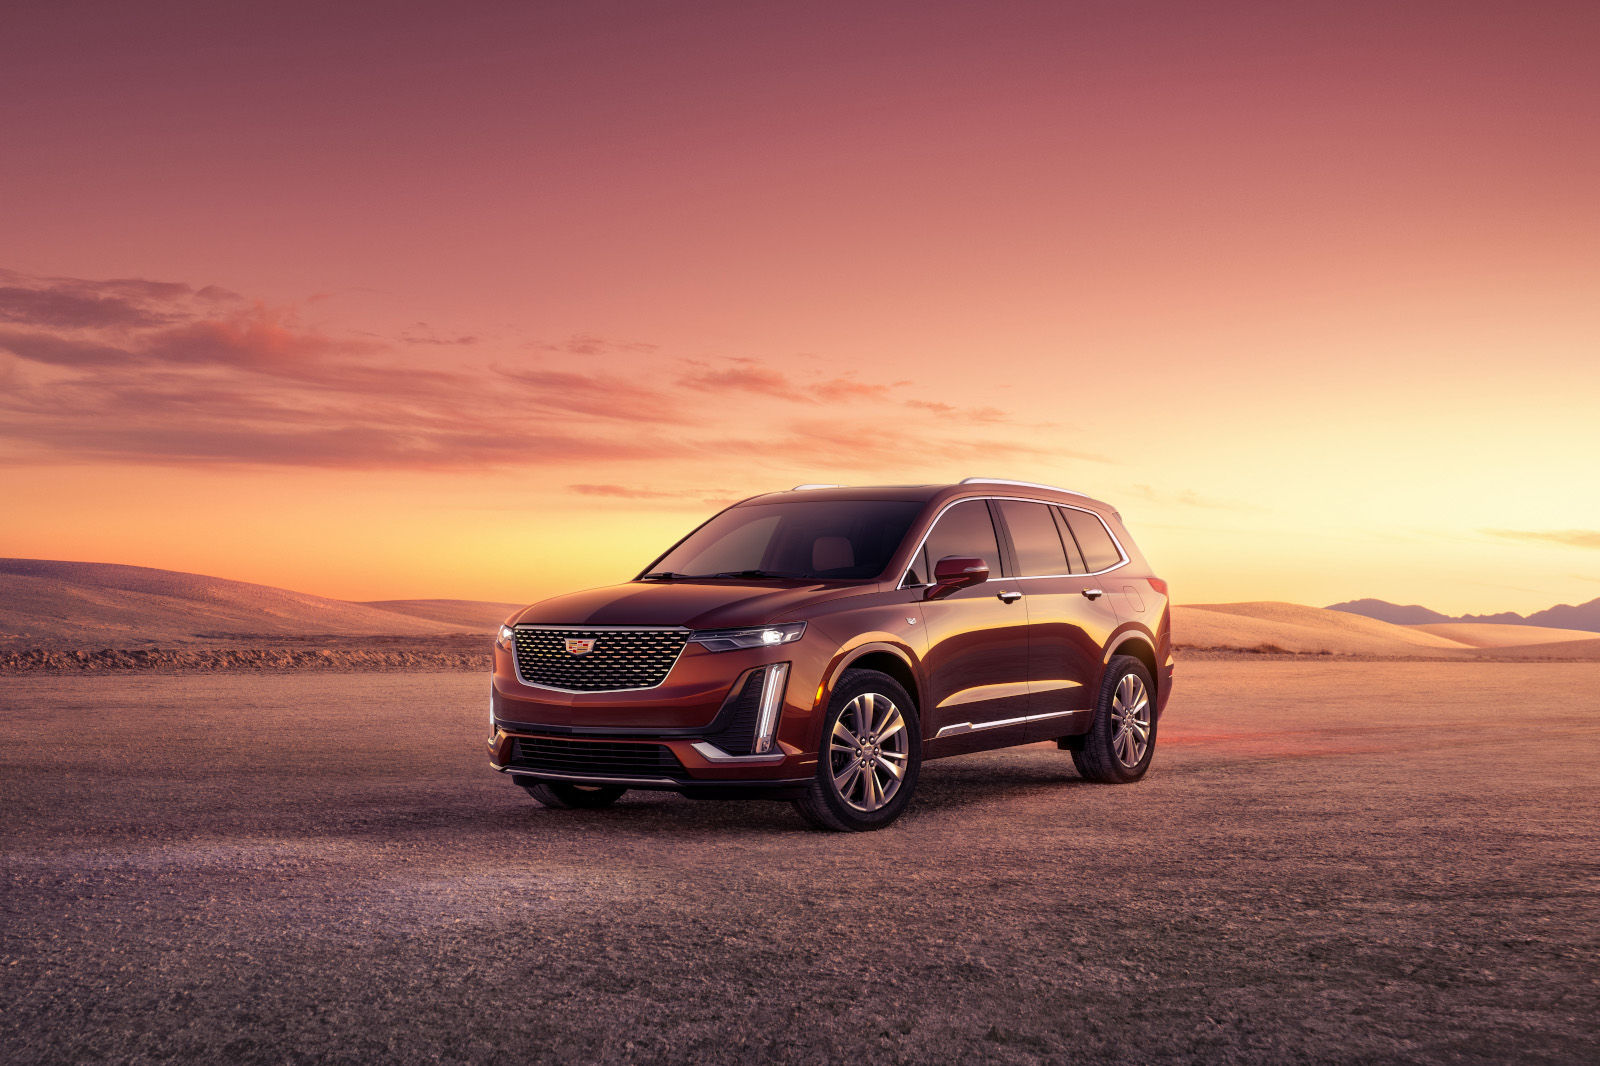 Why Consider a Pre-Owned Cadillac XT6?